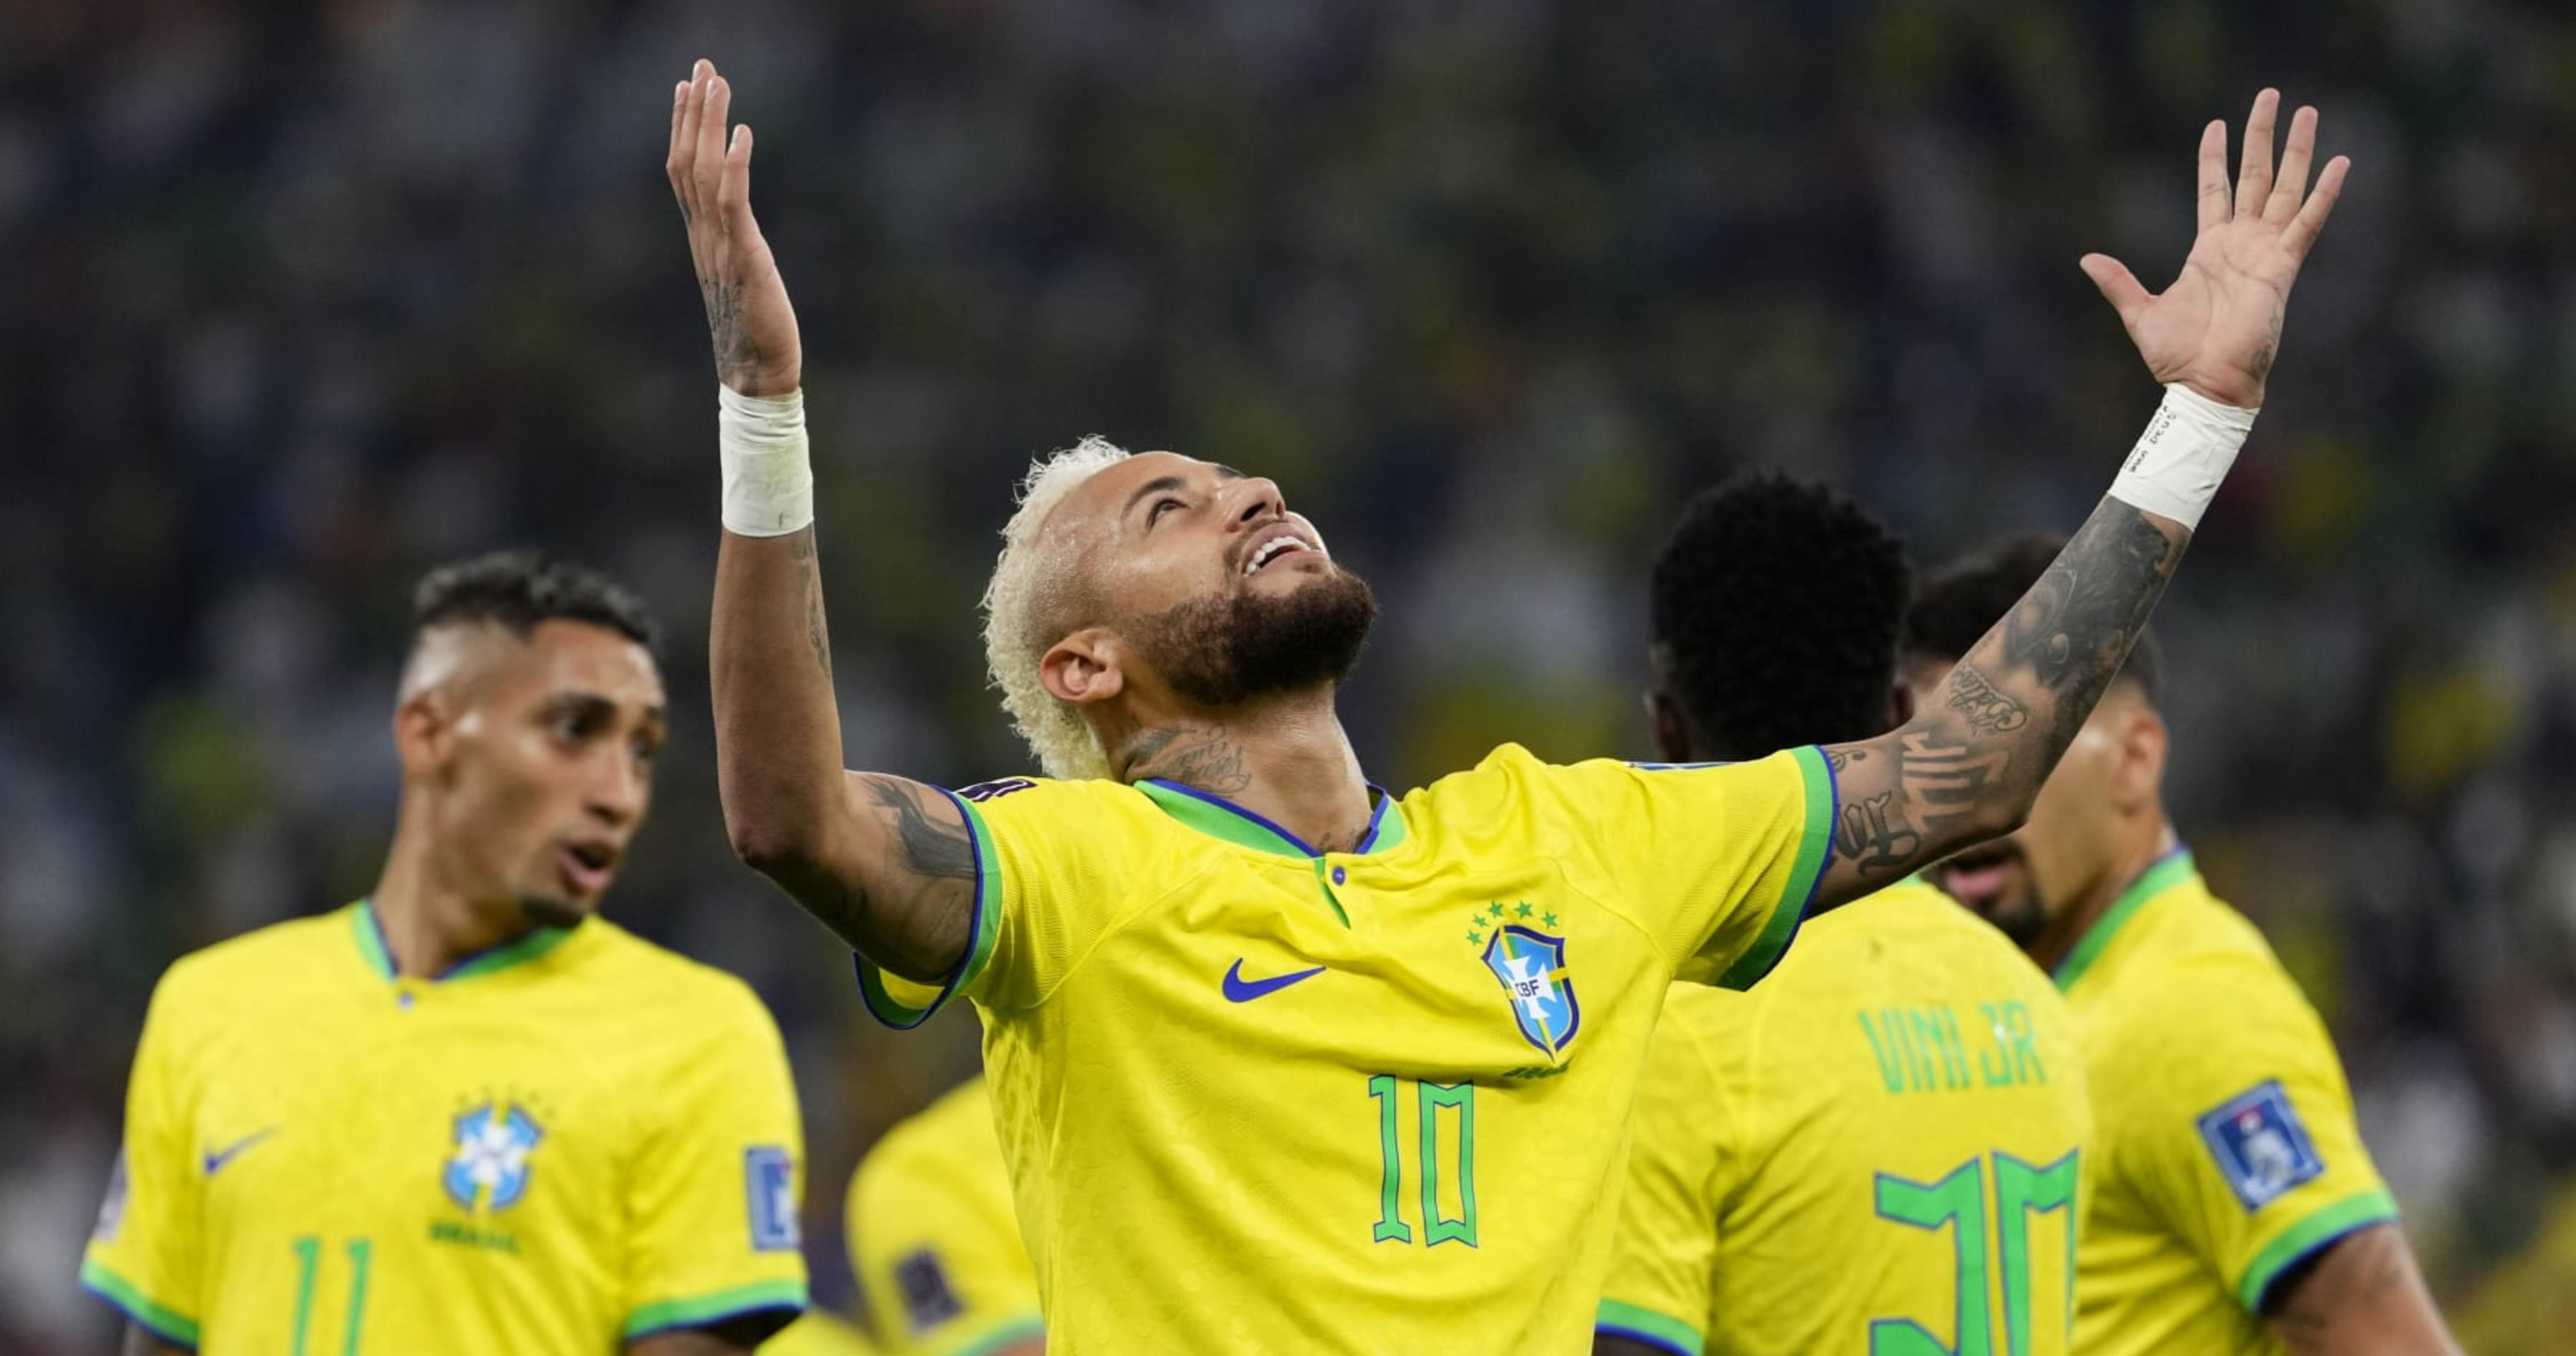 Goals and Highlights of Brazil 4-1 South Korea on World Cup Qatar 2022